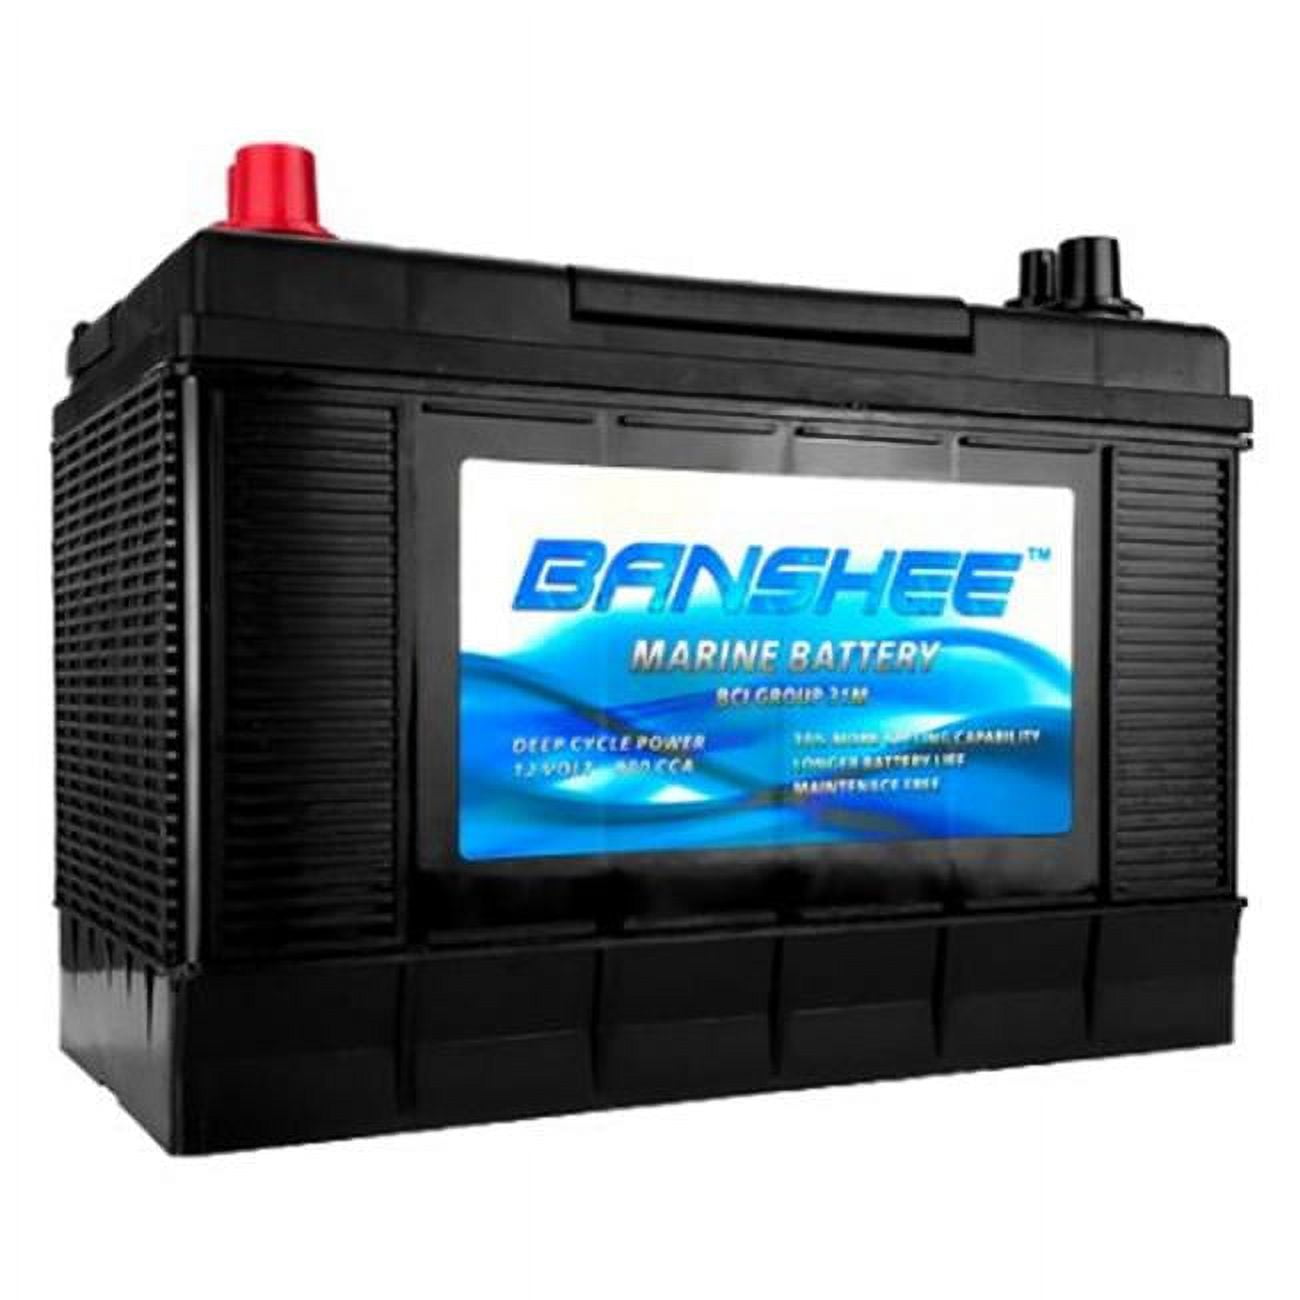 Picture of Banshee 31M-Banshee-10 Best Deep Cycle Marine Battery